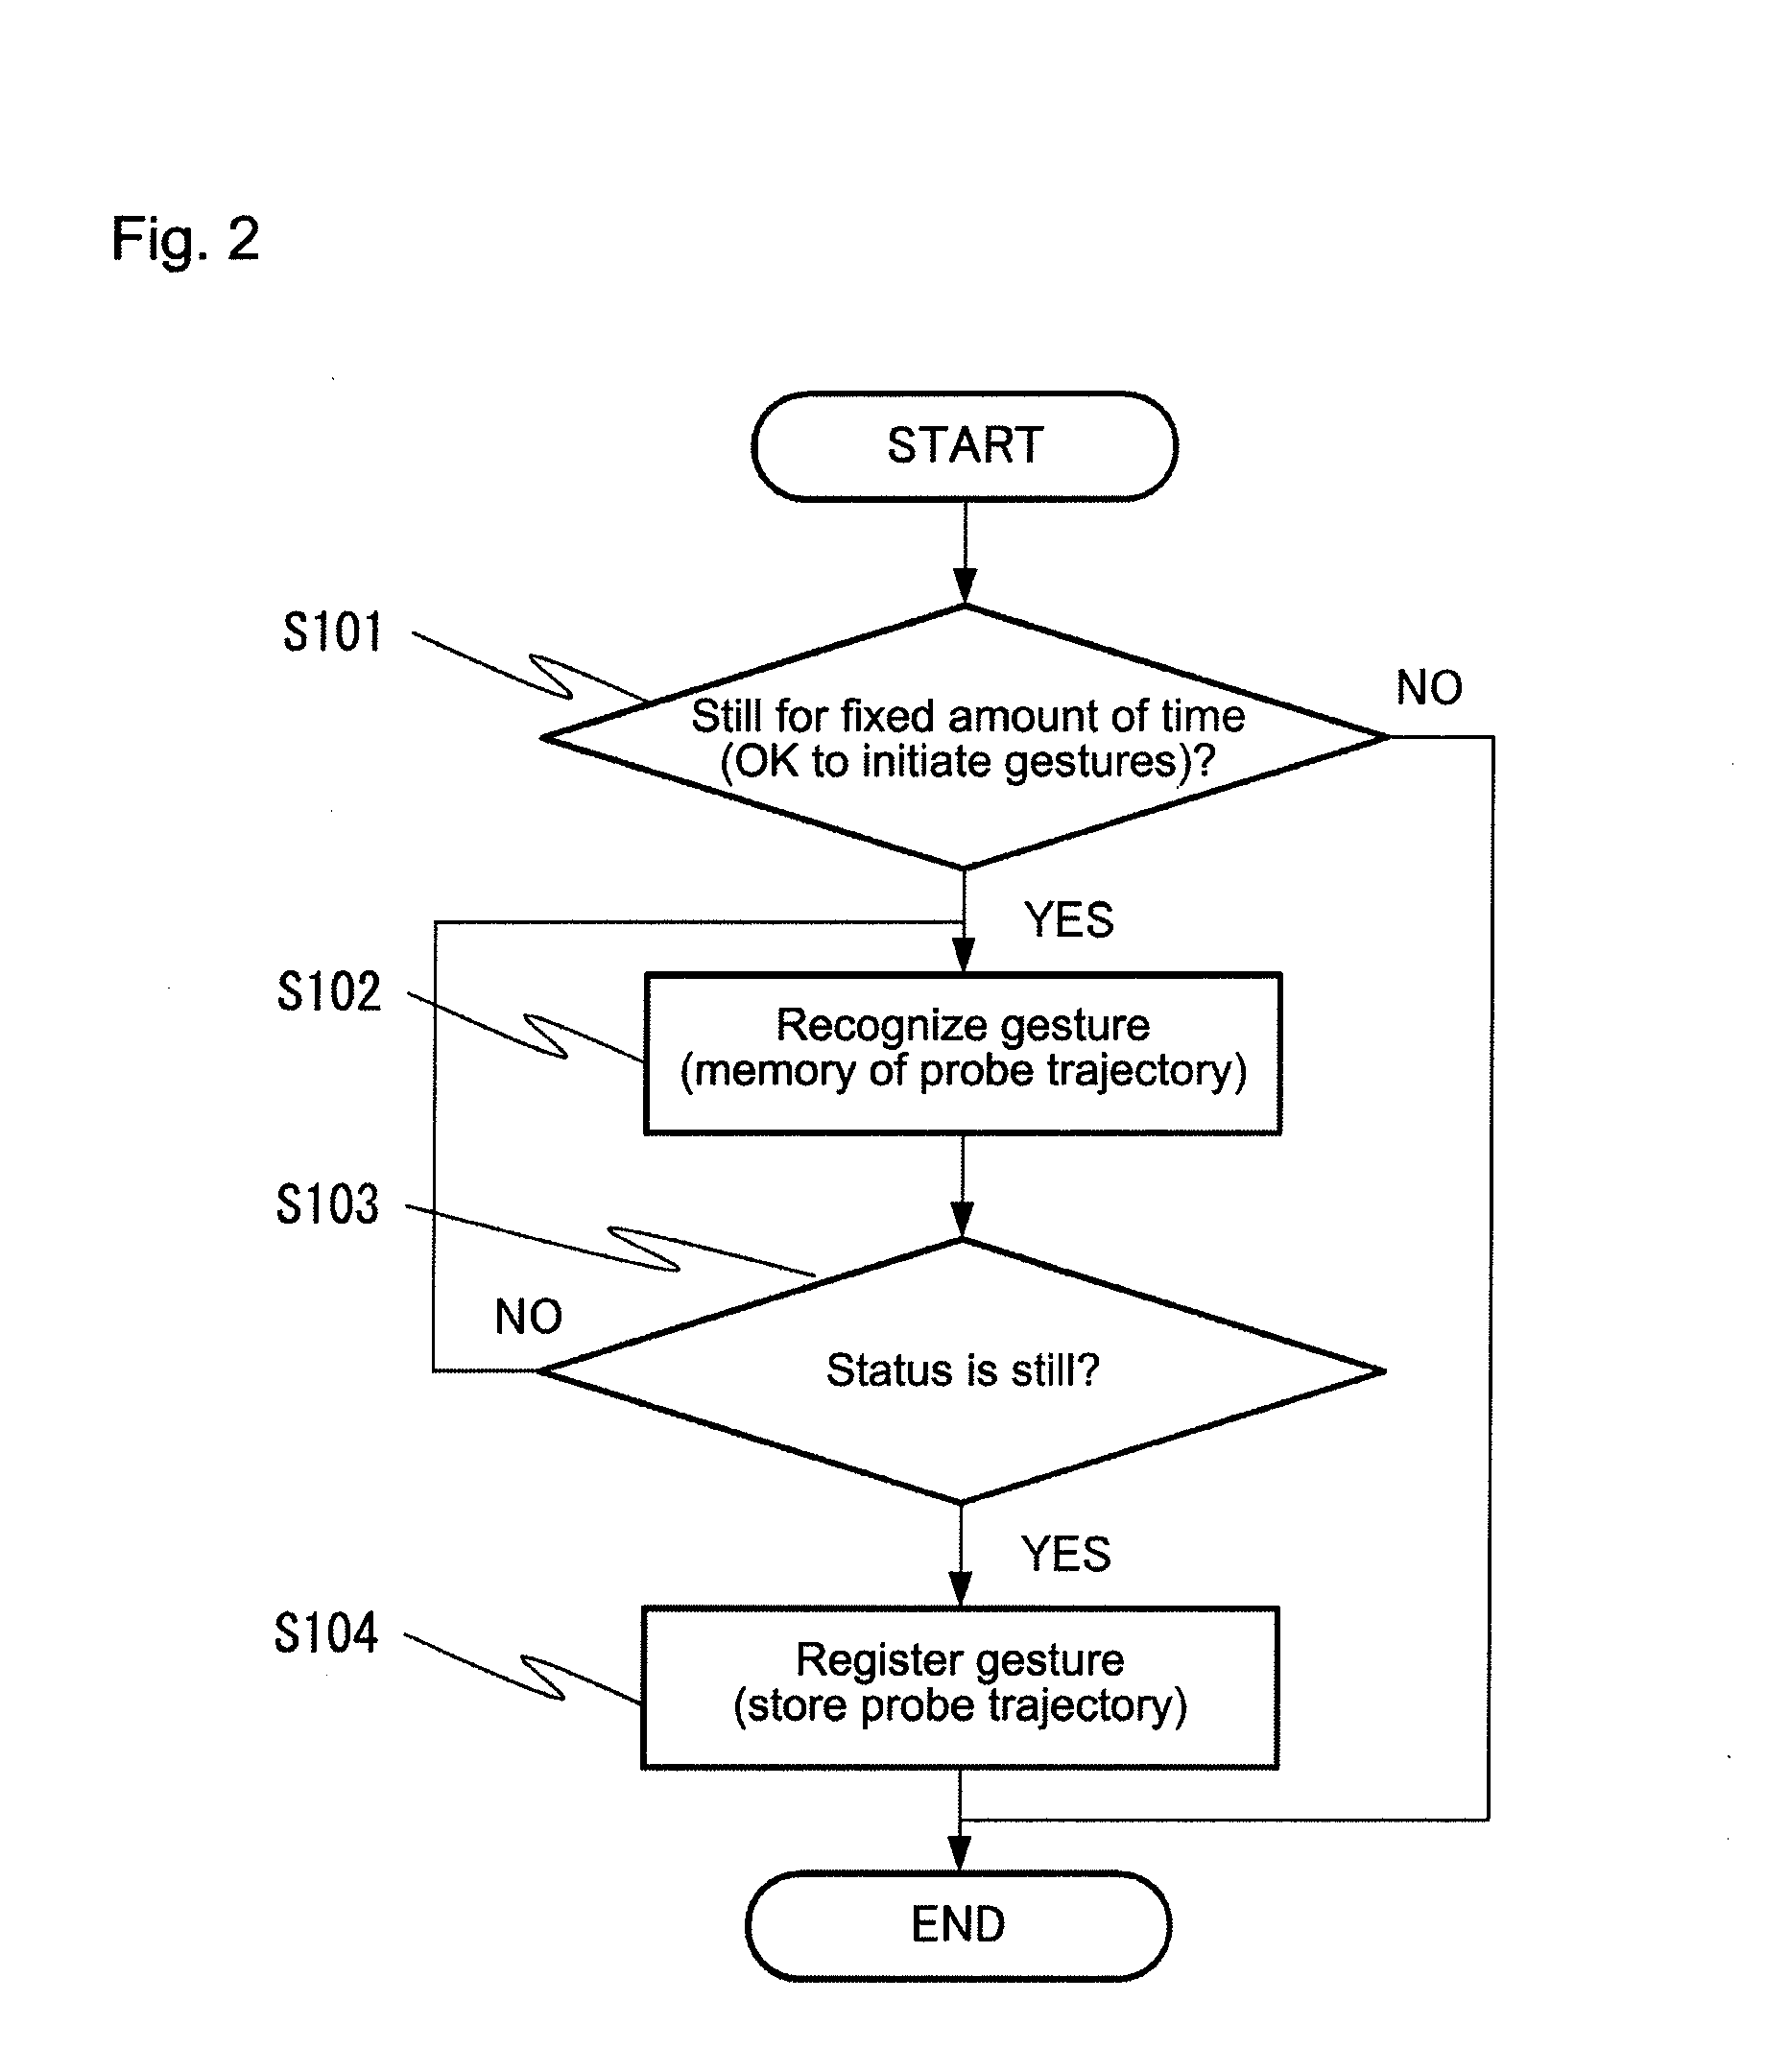 Method and program for using gestures to control a coordinate measuring device